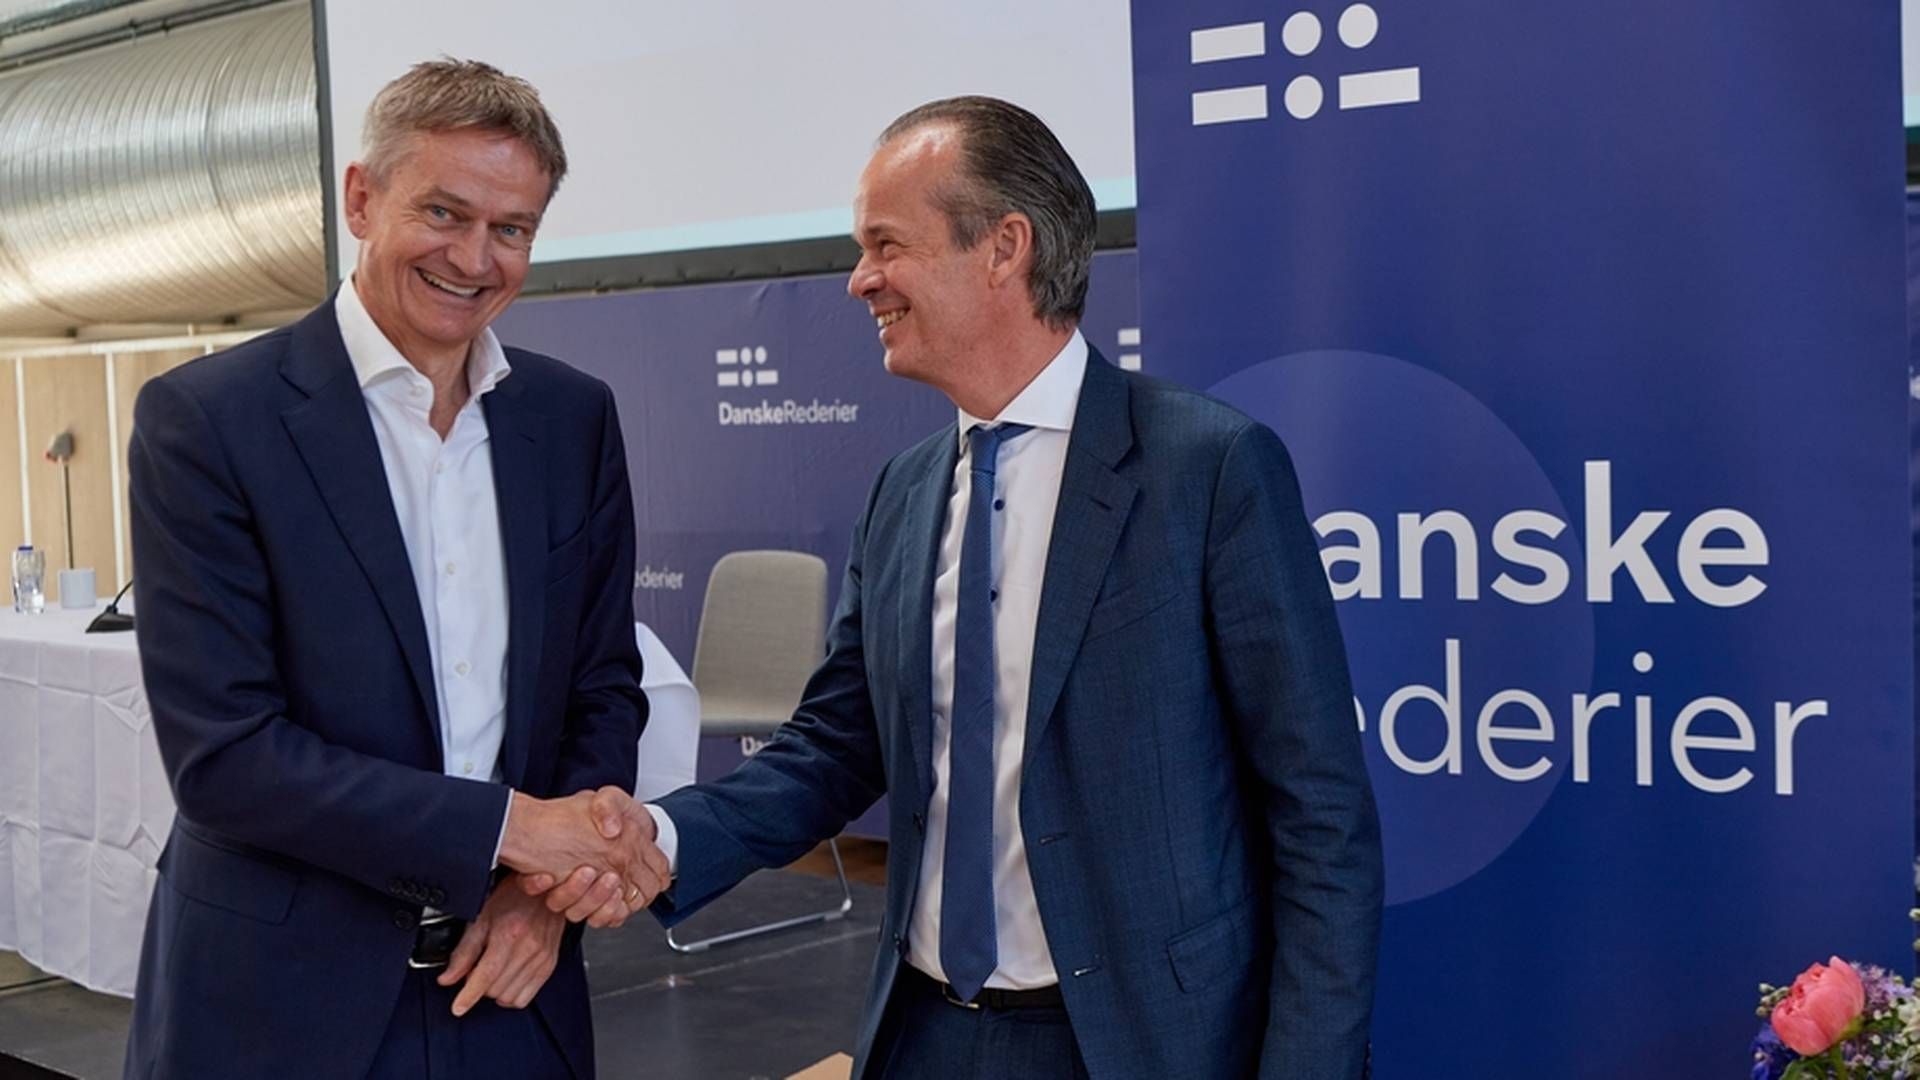 DFDS CEO Torben Carlsen (left) takes over as chair of Danish Shipping. | Photo: Carsten Lundager / Danske Rederier